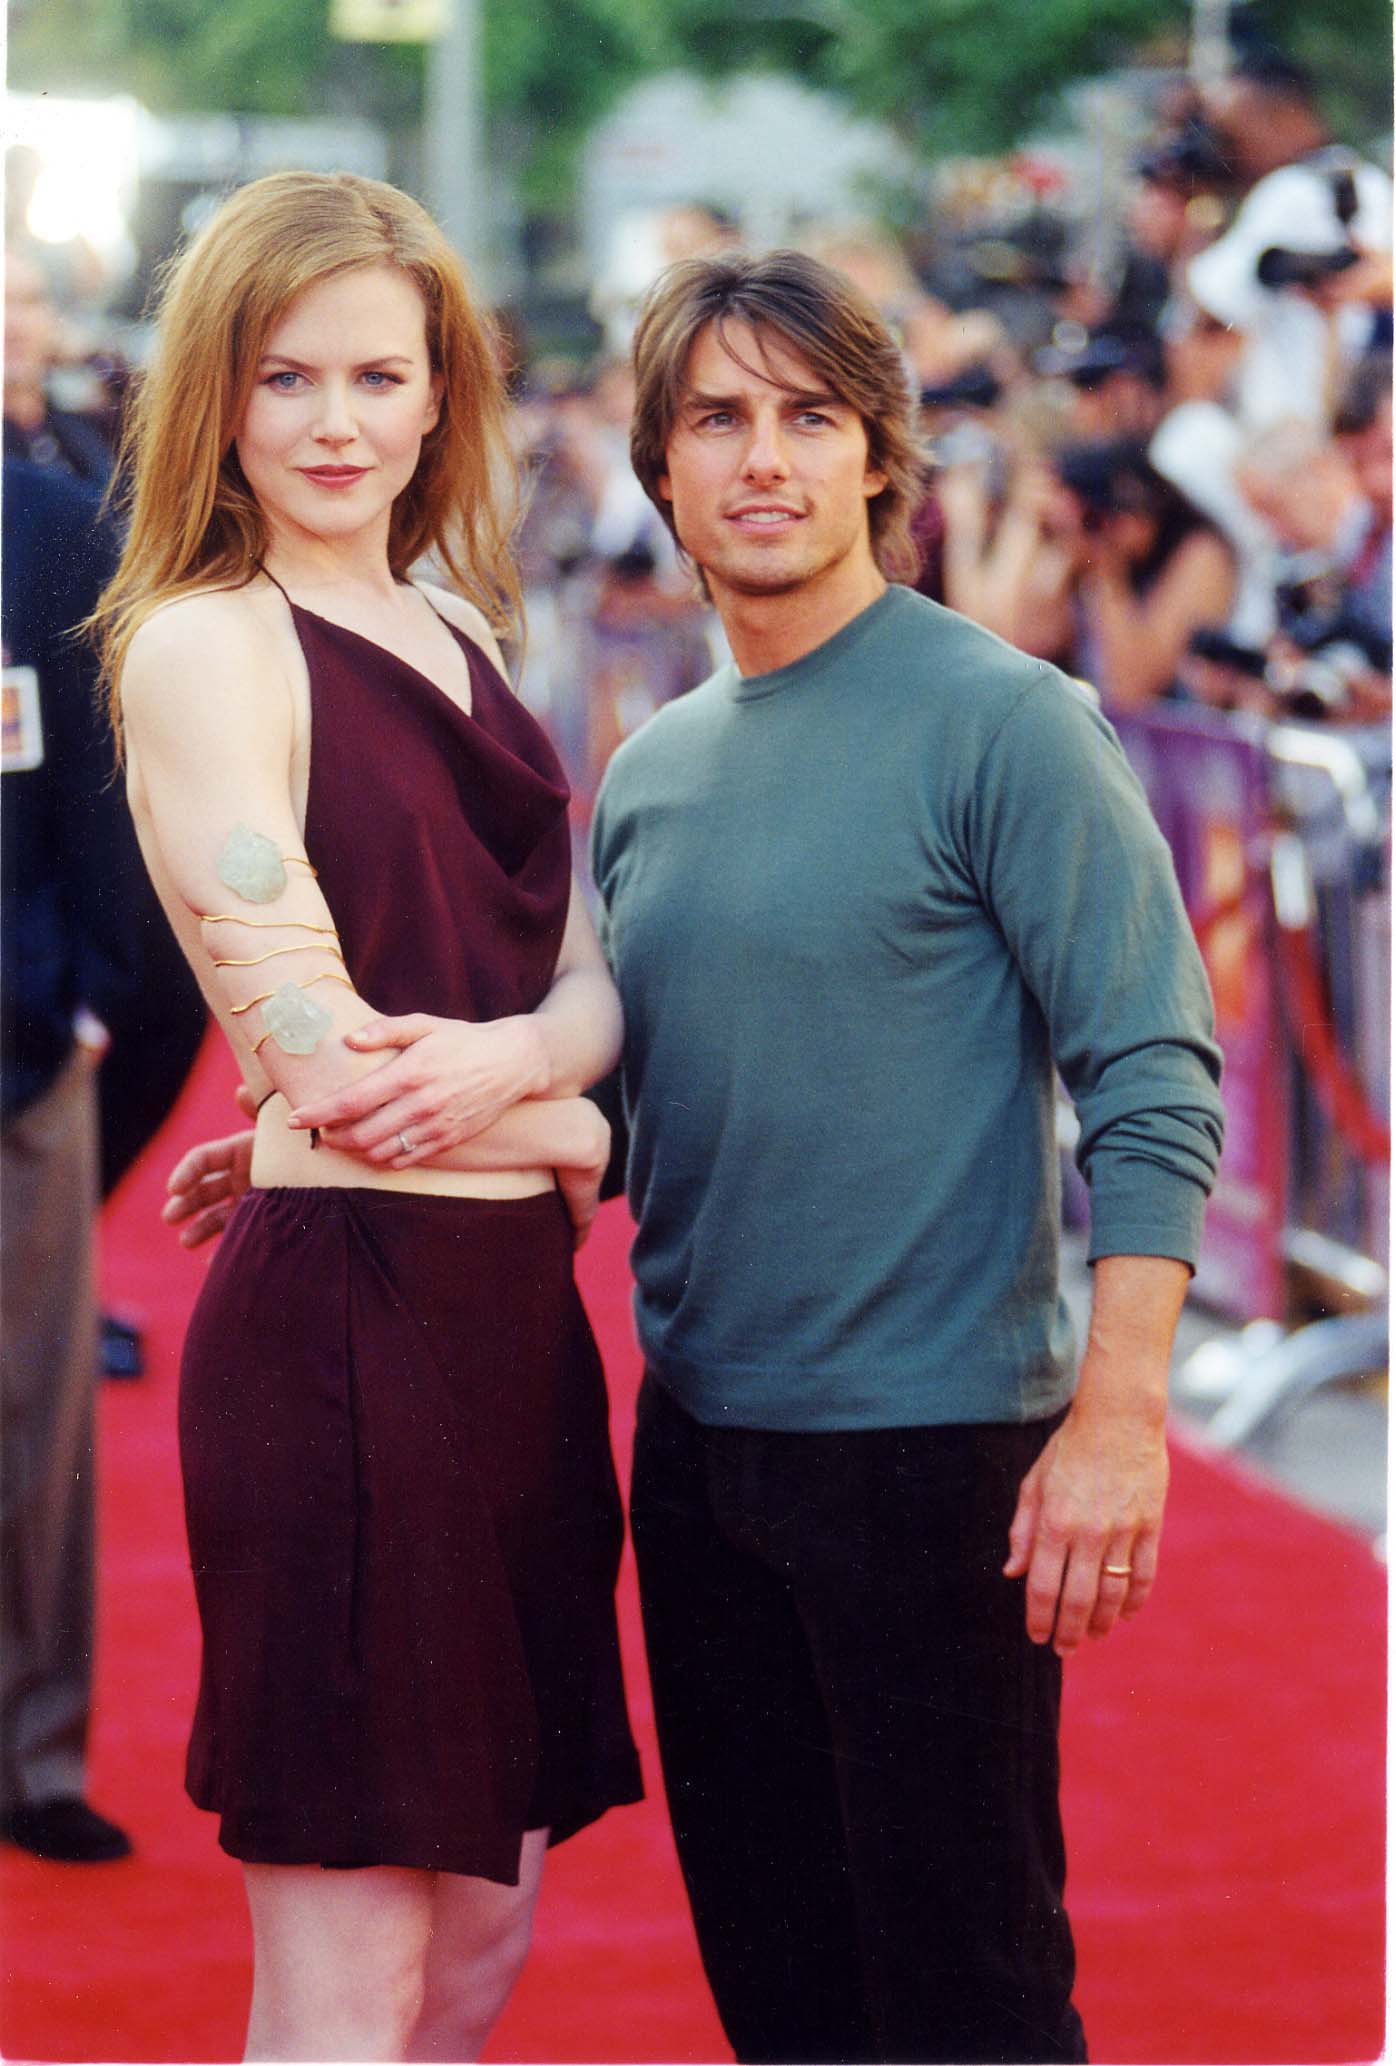 Nicole Kidman and Tom Cruise attend the premiere of 'Eyes Wide Shut' in Los Angeles in 1999